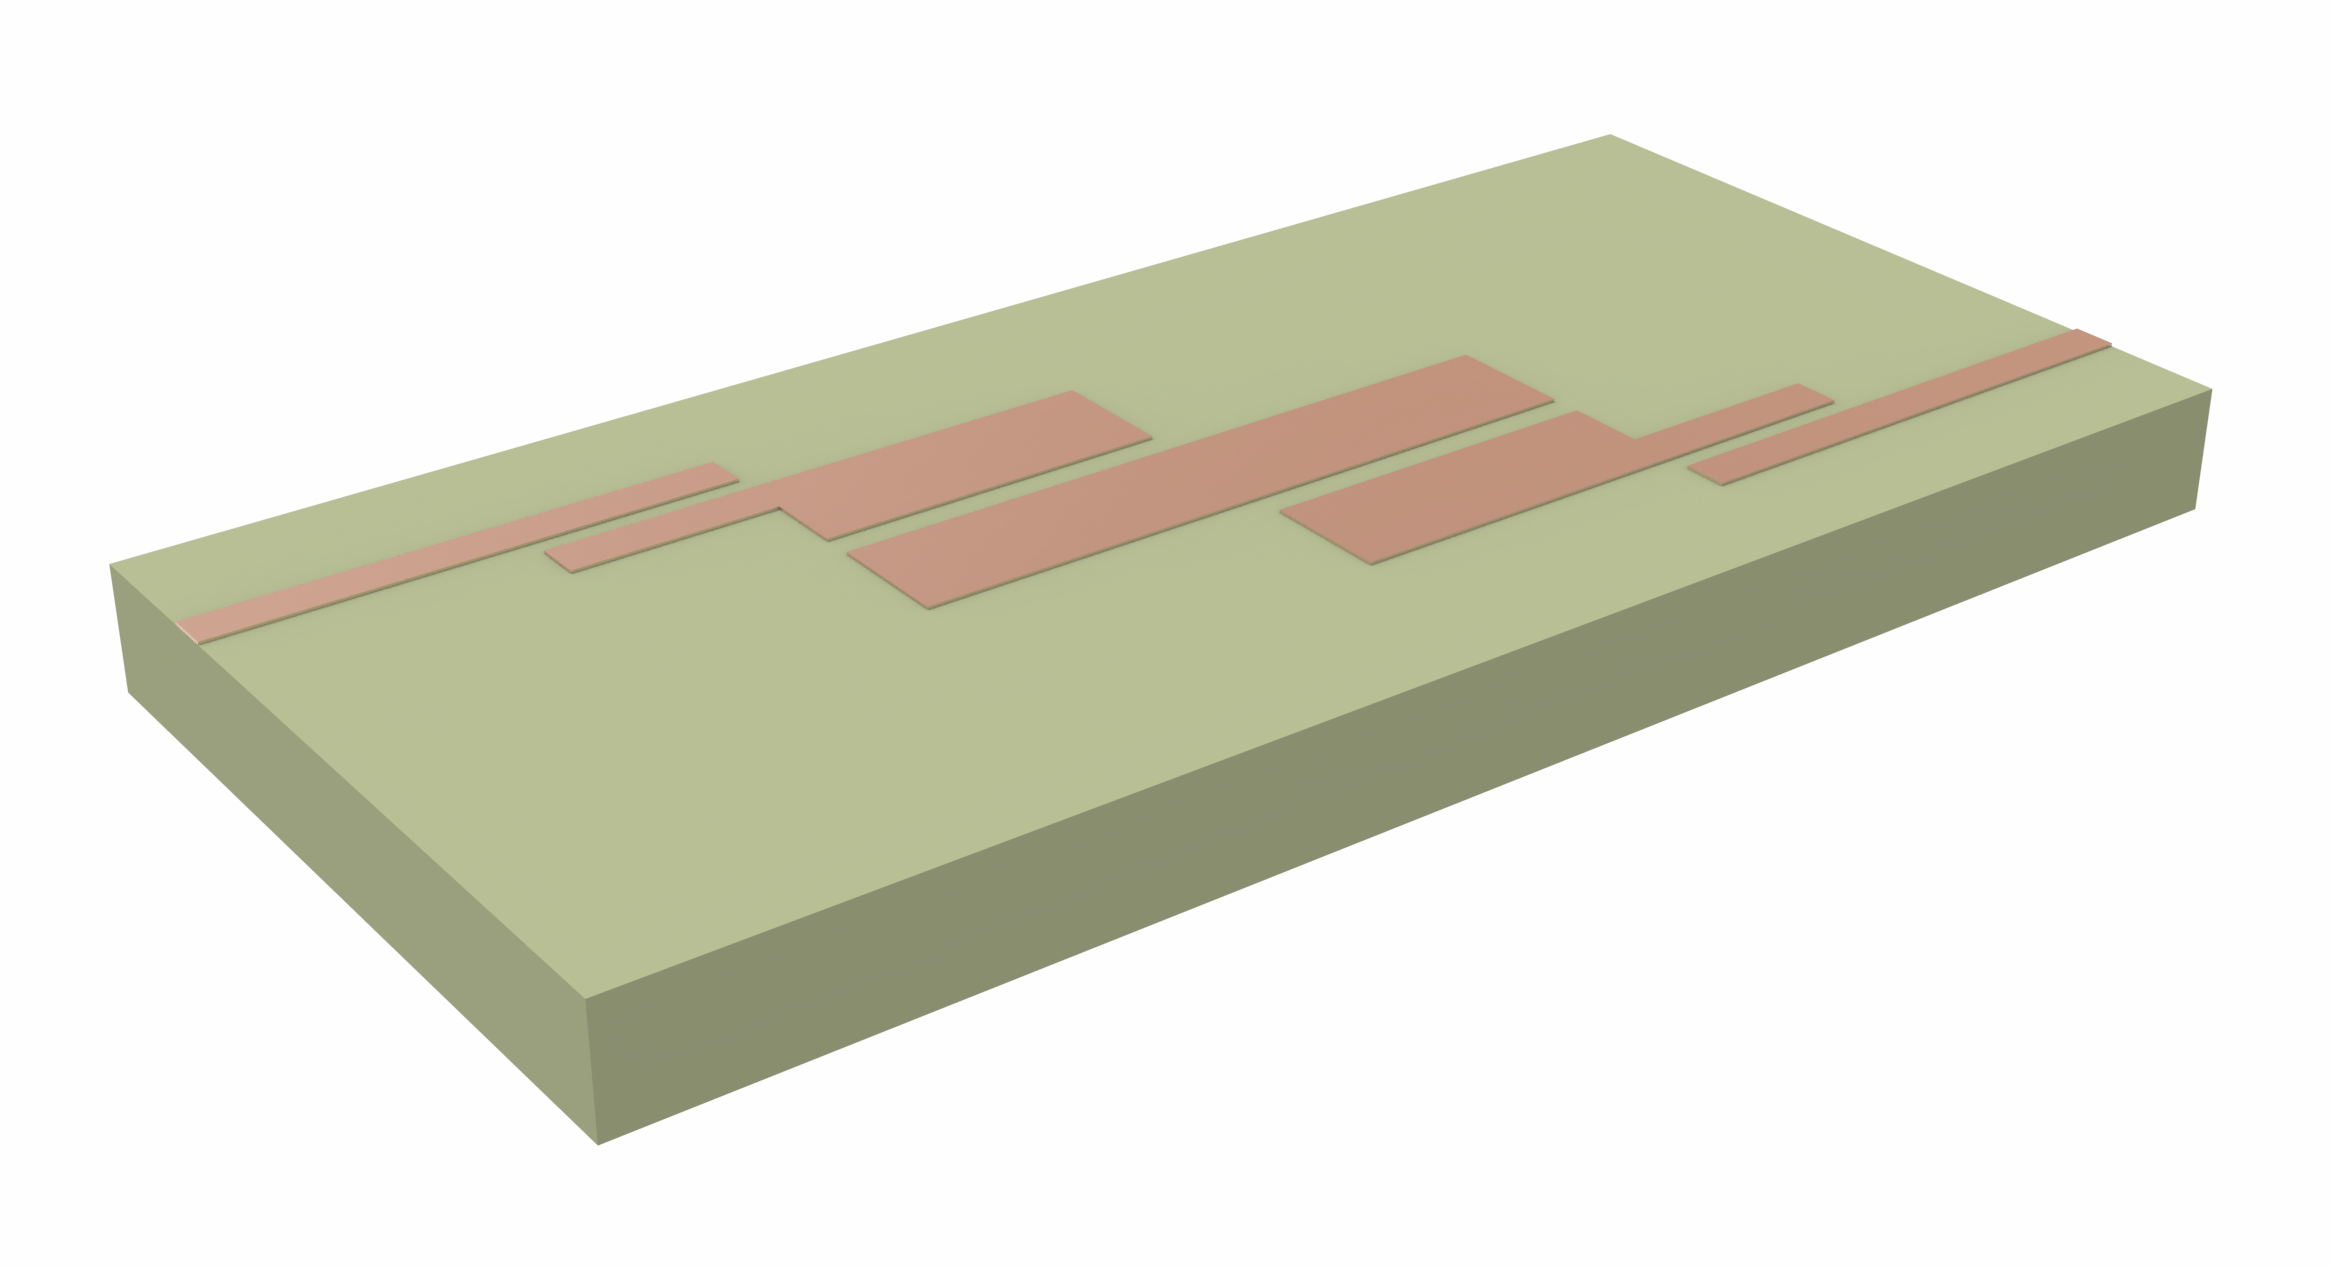 Schematic of a coupled line bandpass filter